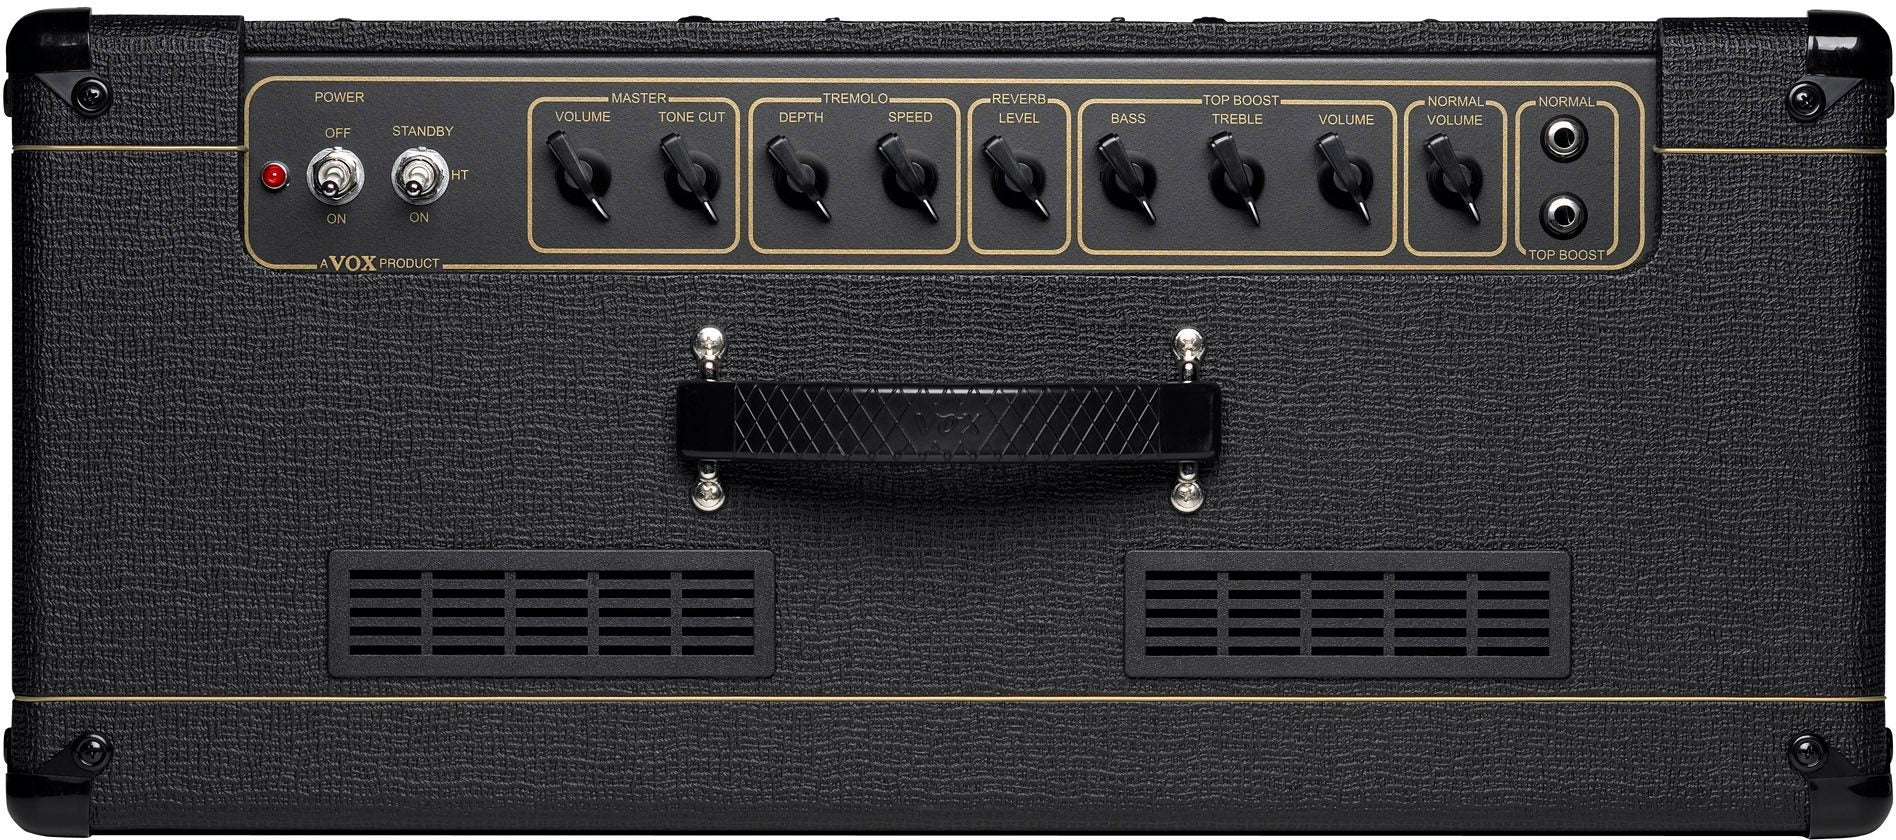 Vox 15 watt 2-channel All-tube 1x12 inch Guitar Combo Amplifier with Tremolo and Reverb AC15C1